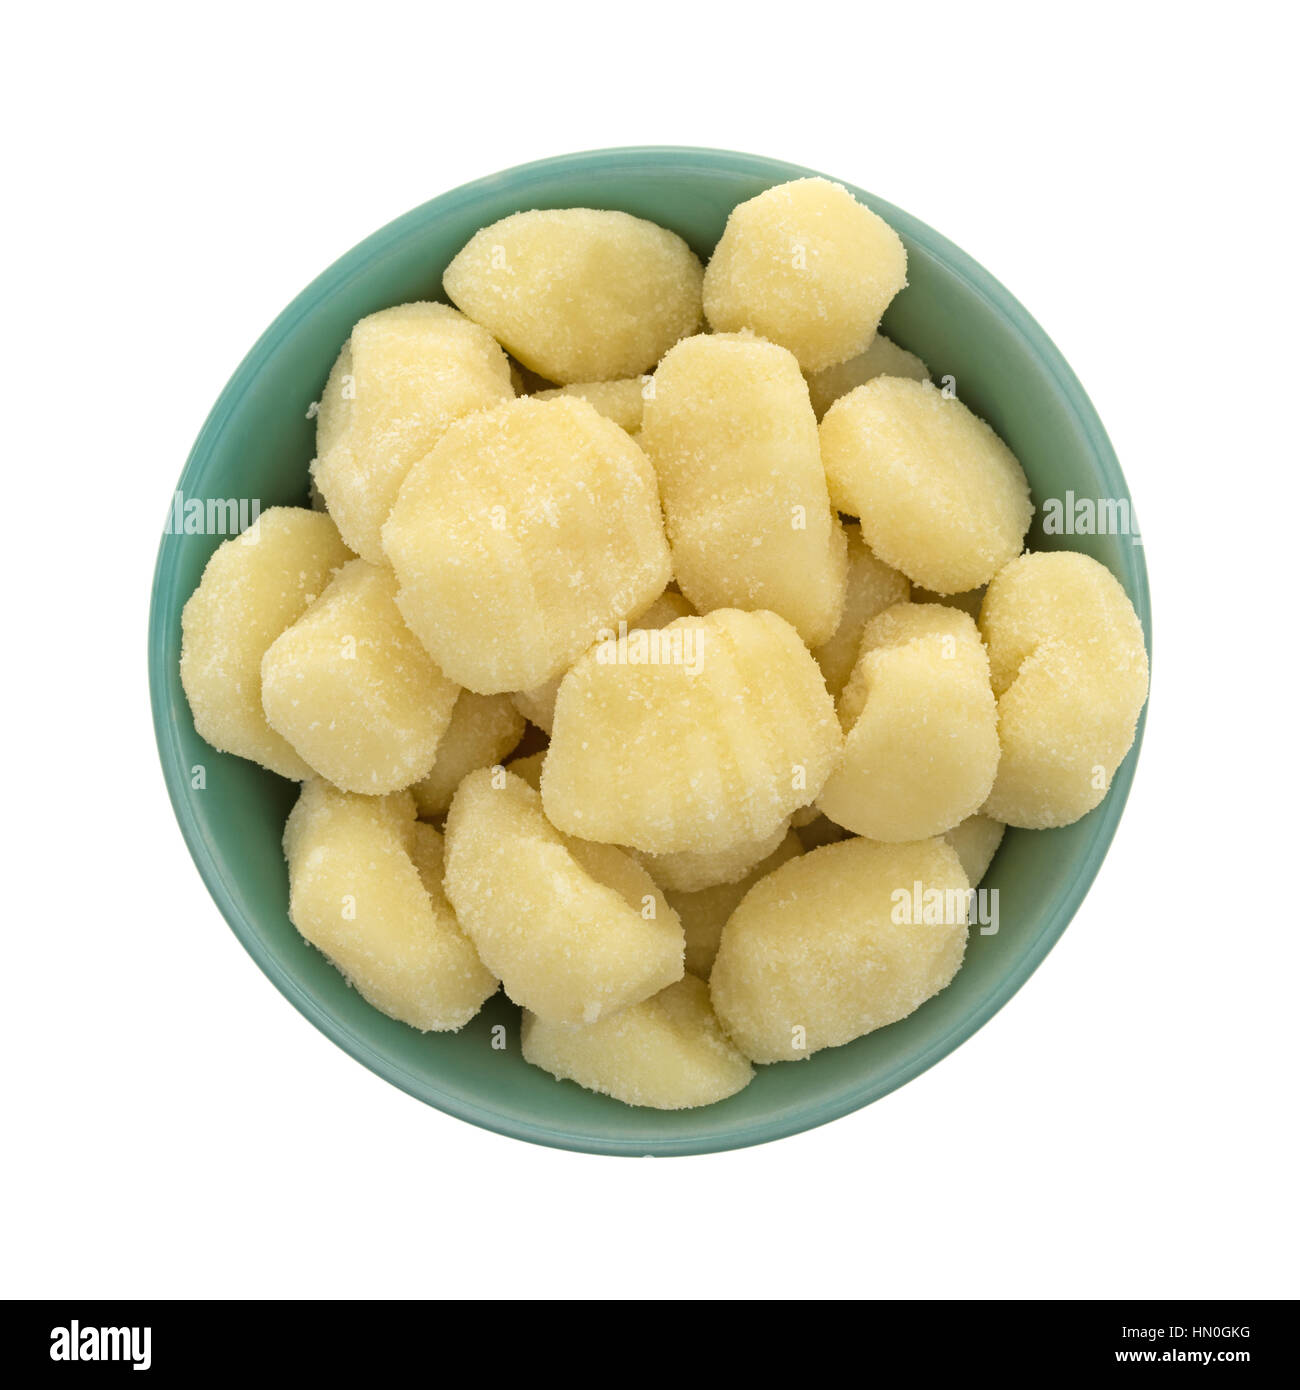 Top view of plain potato gnocchi in a green bowl isolated on a white background. Stock Photo